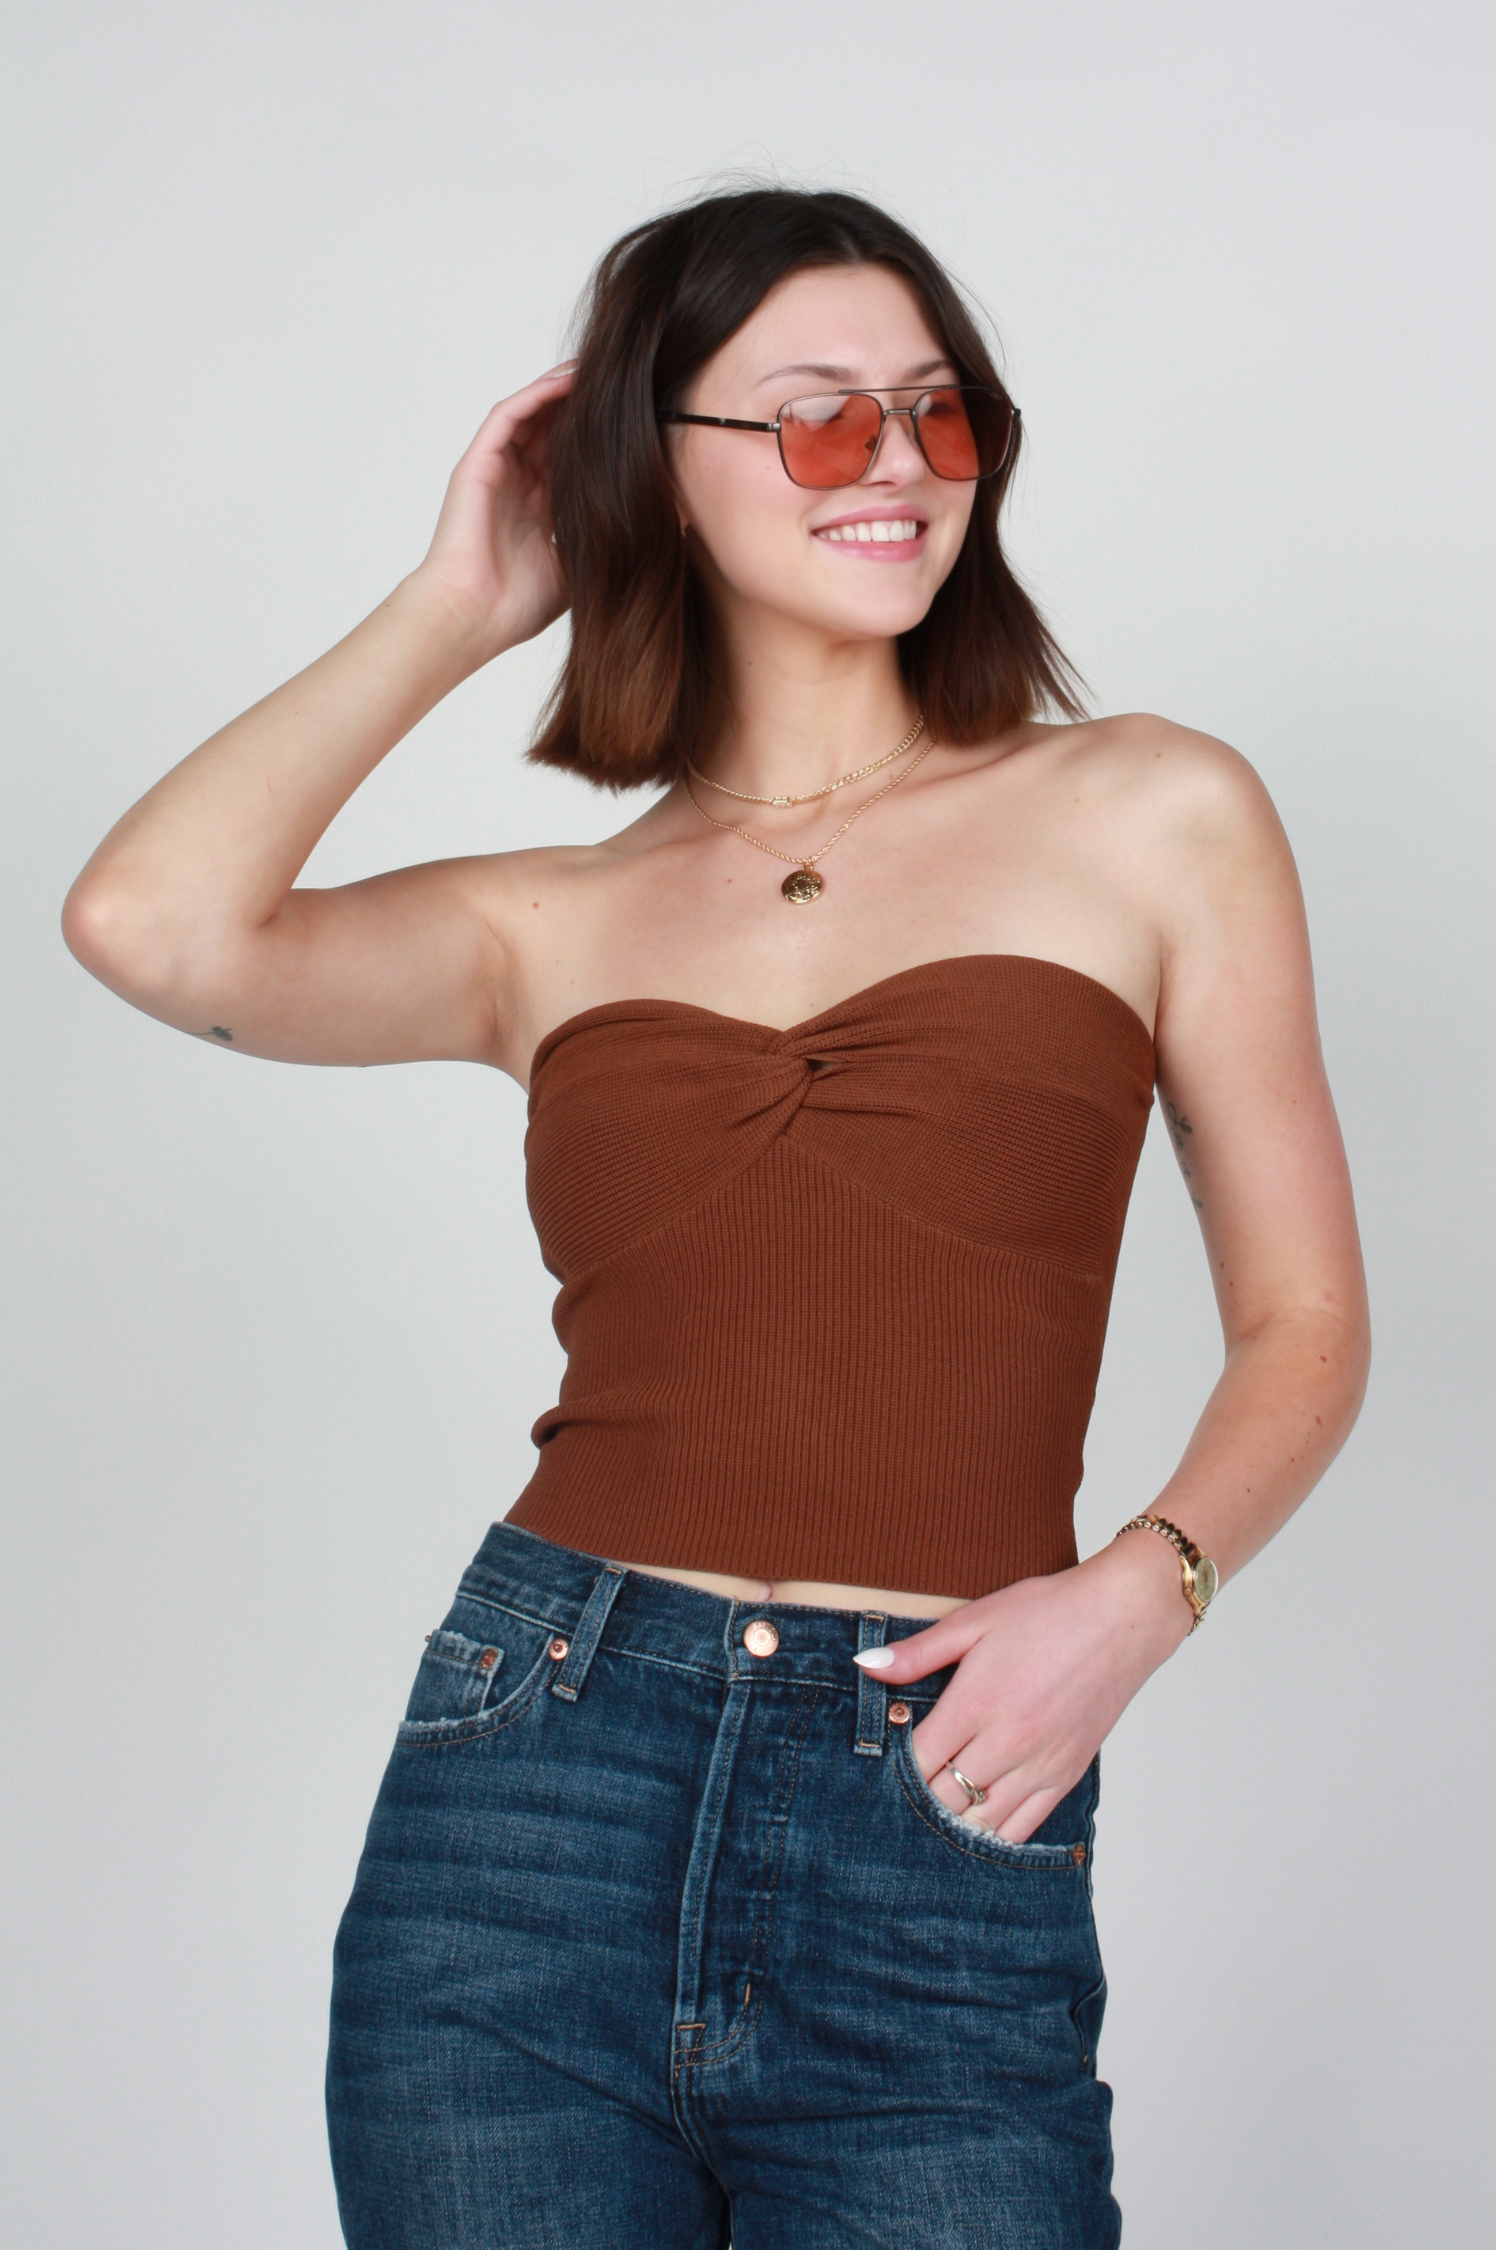 Campbell Sweetheart Tube Top